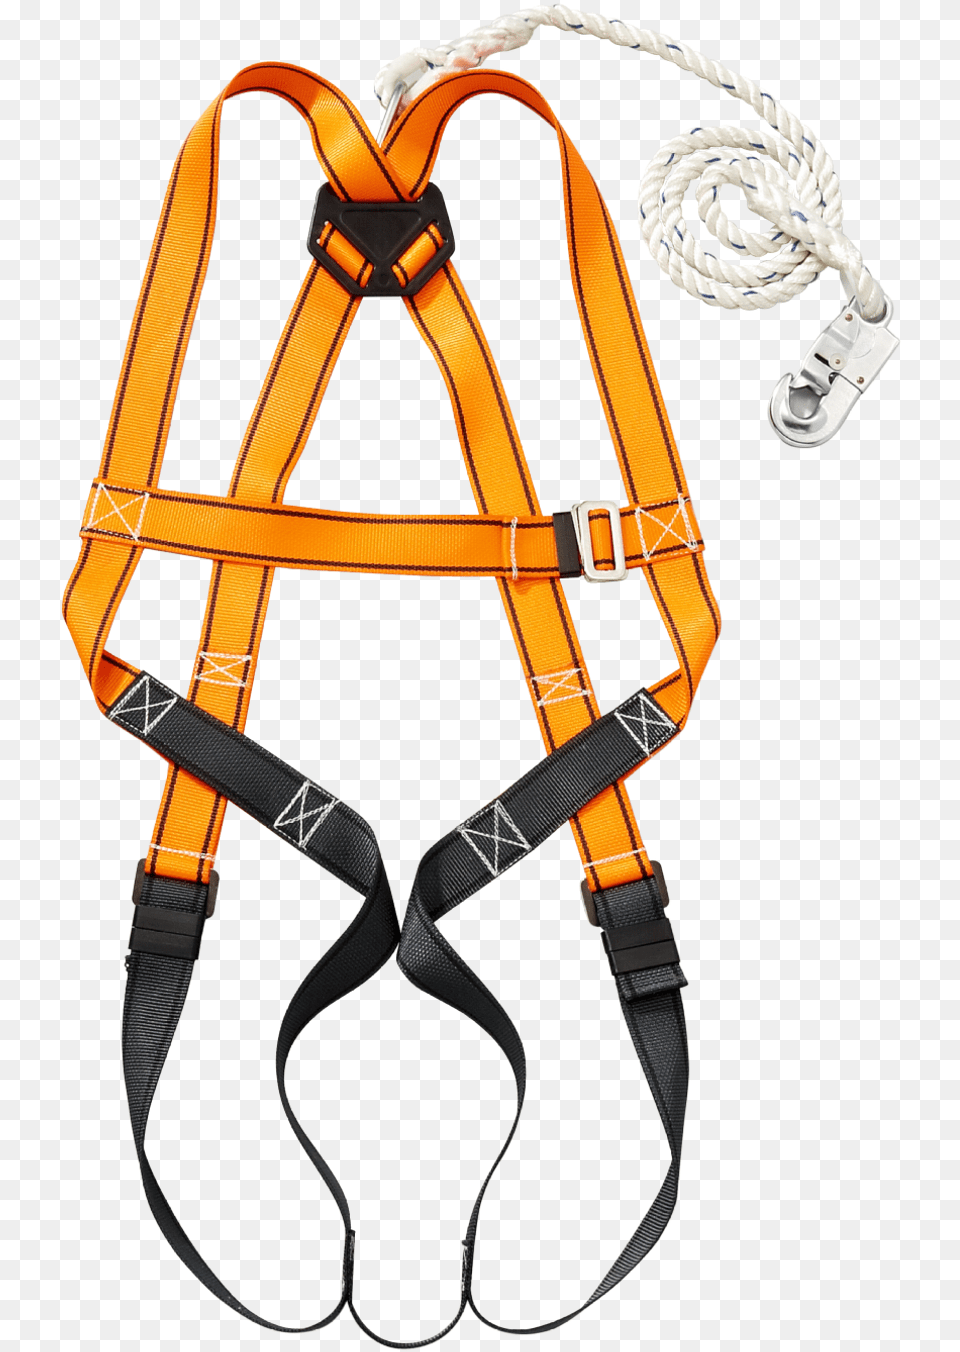 Blue Eagle Workplace Safety Supplies Fc45 Face Shield Lanyard Full Body Harness, Clothing, Lifejacket, Vest, Accessories Png Image